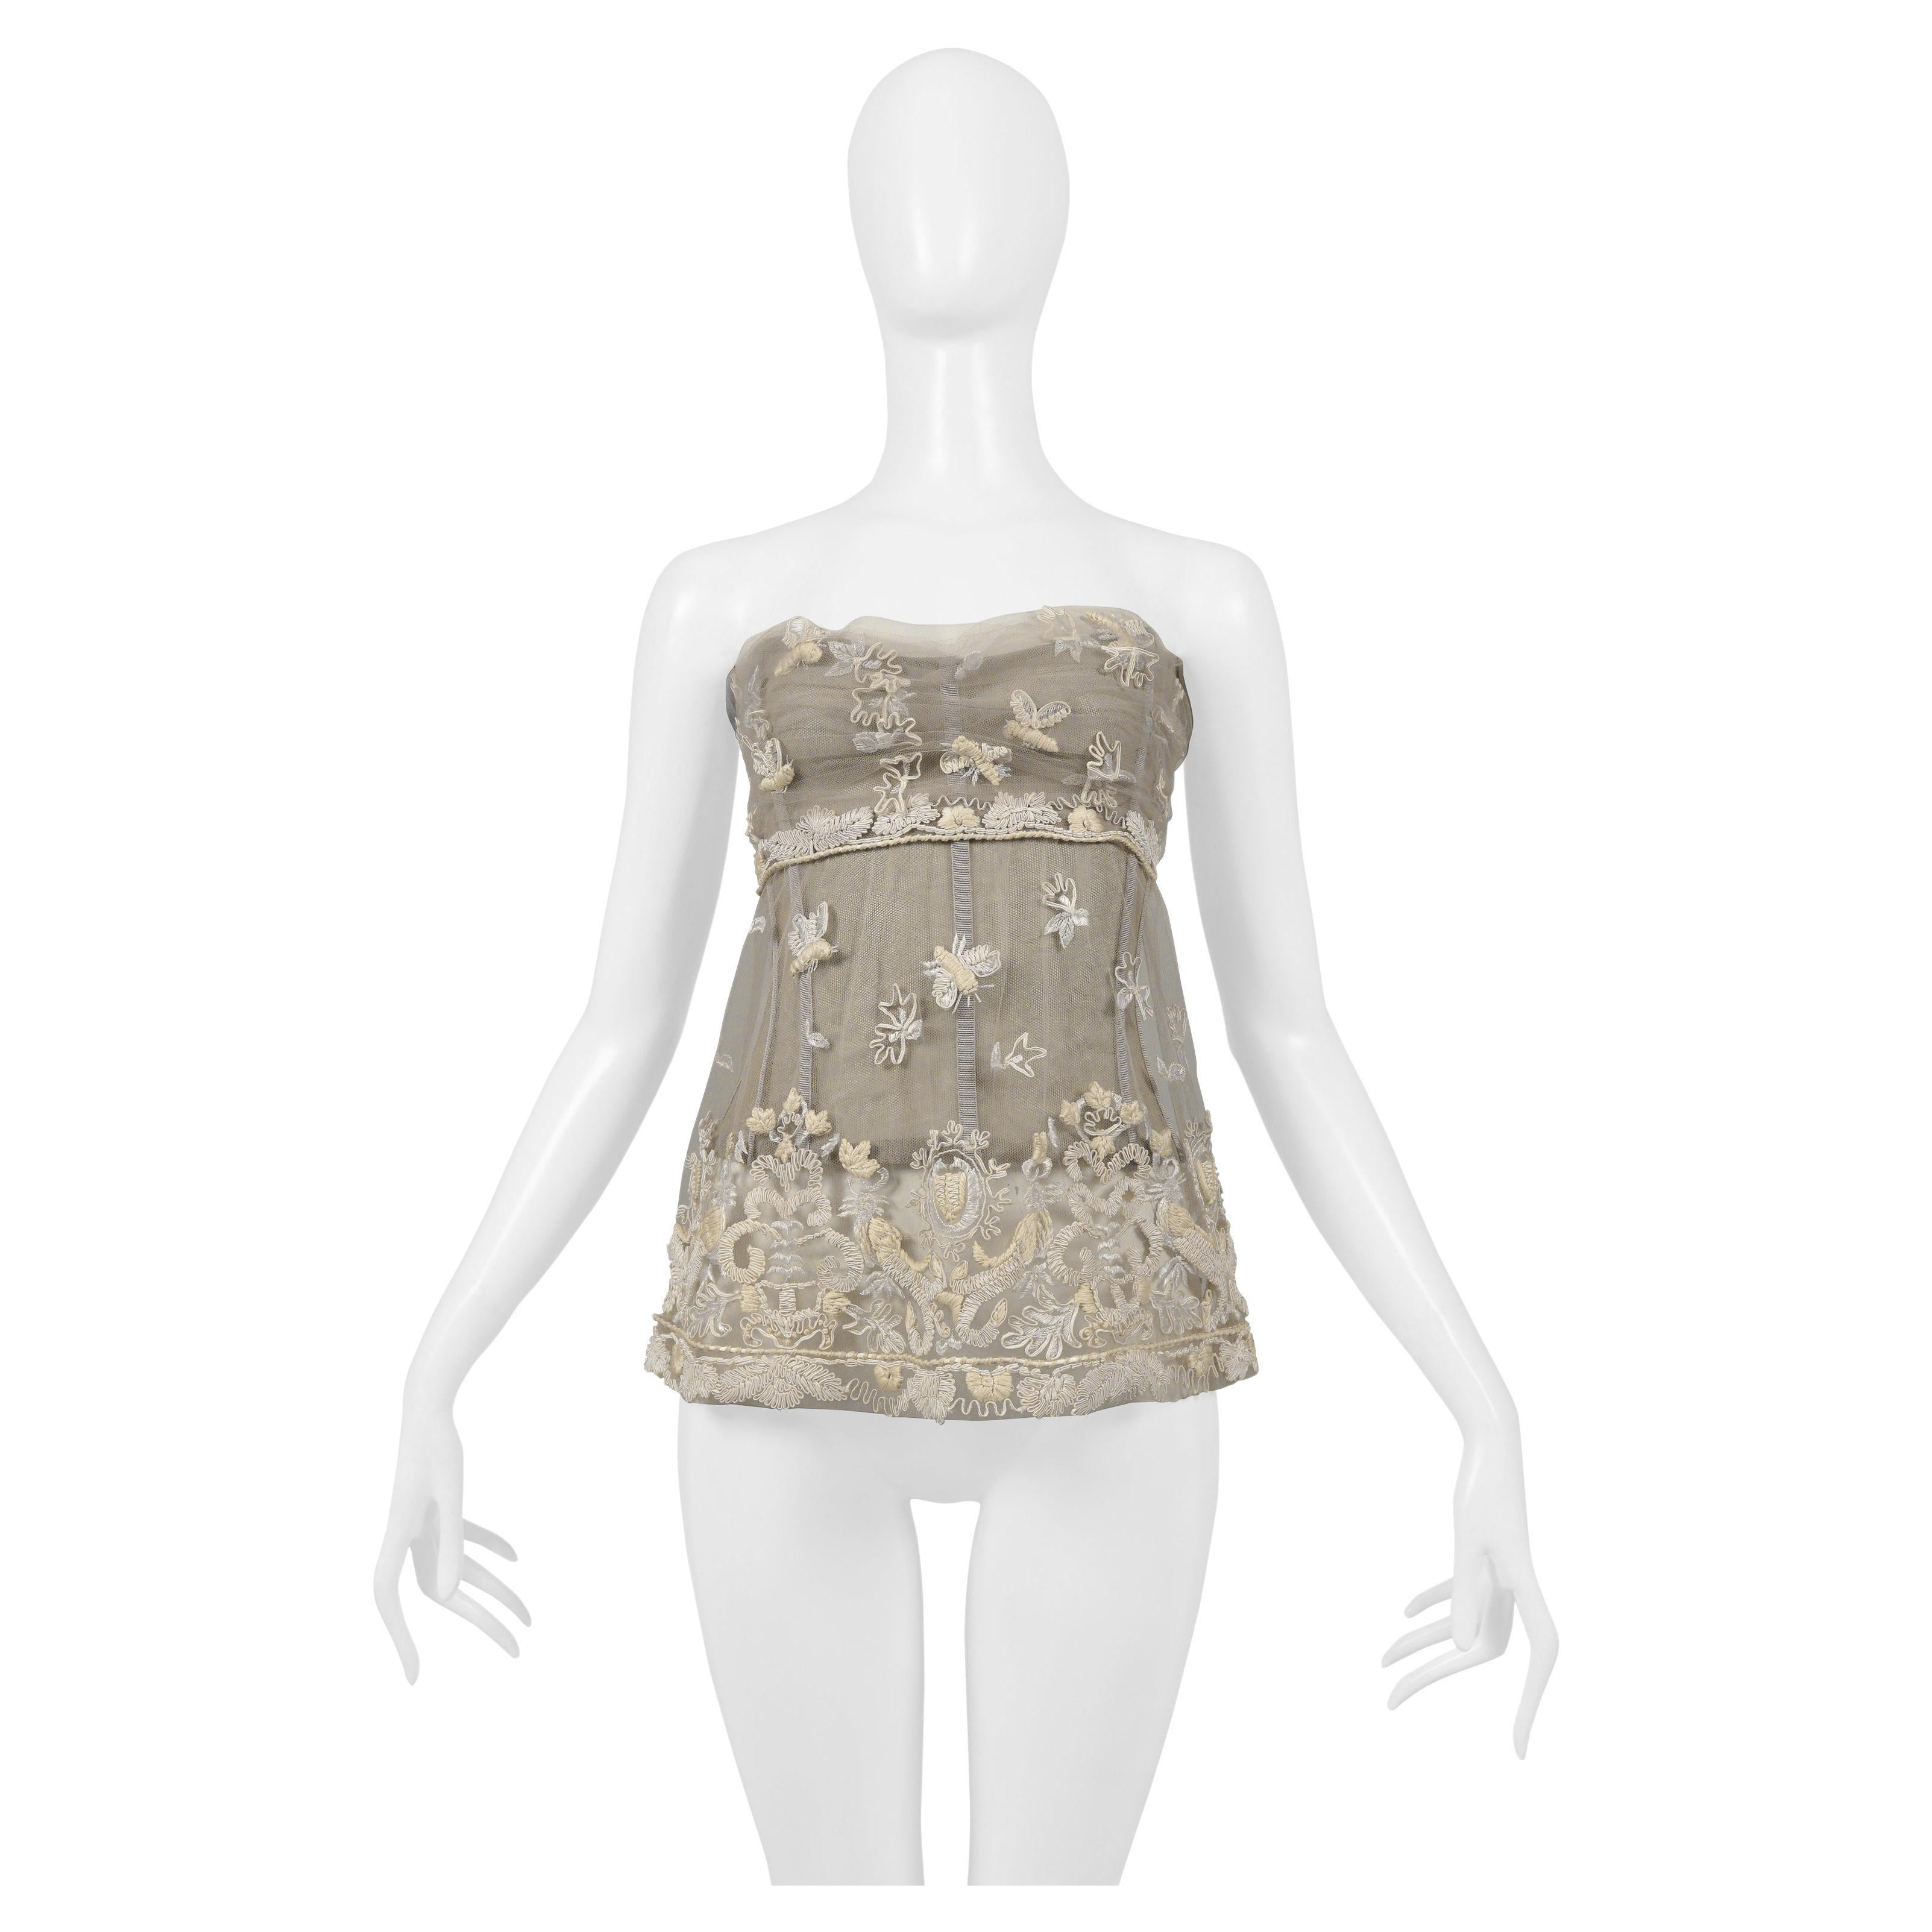 Resurrection Vintage is excited to offer a vintage Dolce & Gabbana lace bustier top featuring dimensional off-white embroidery, corset boning interior, and a zipper down the back.
* Dolce & Gabbana
* Size: IT42
* Fabric: 10% Cotton, 80% Nylon, 10%